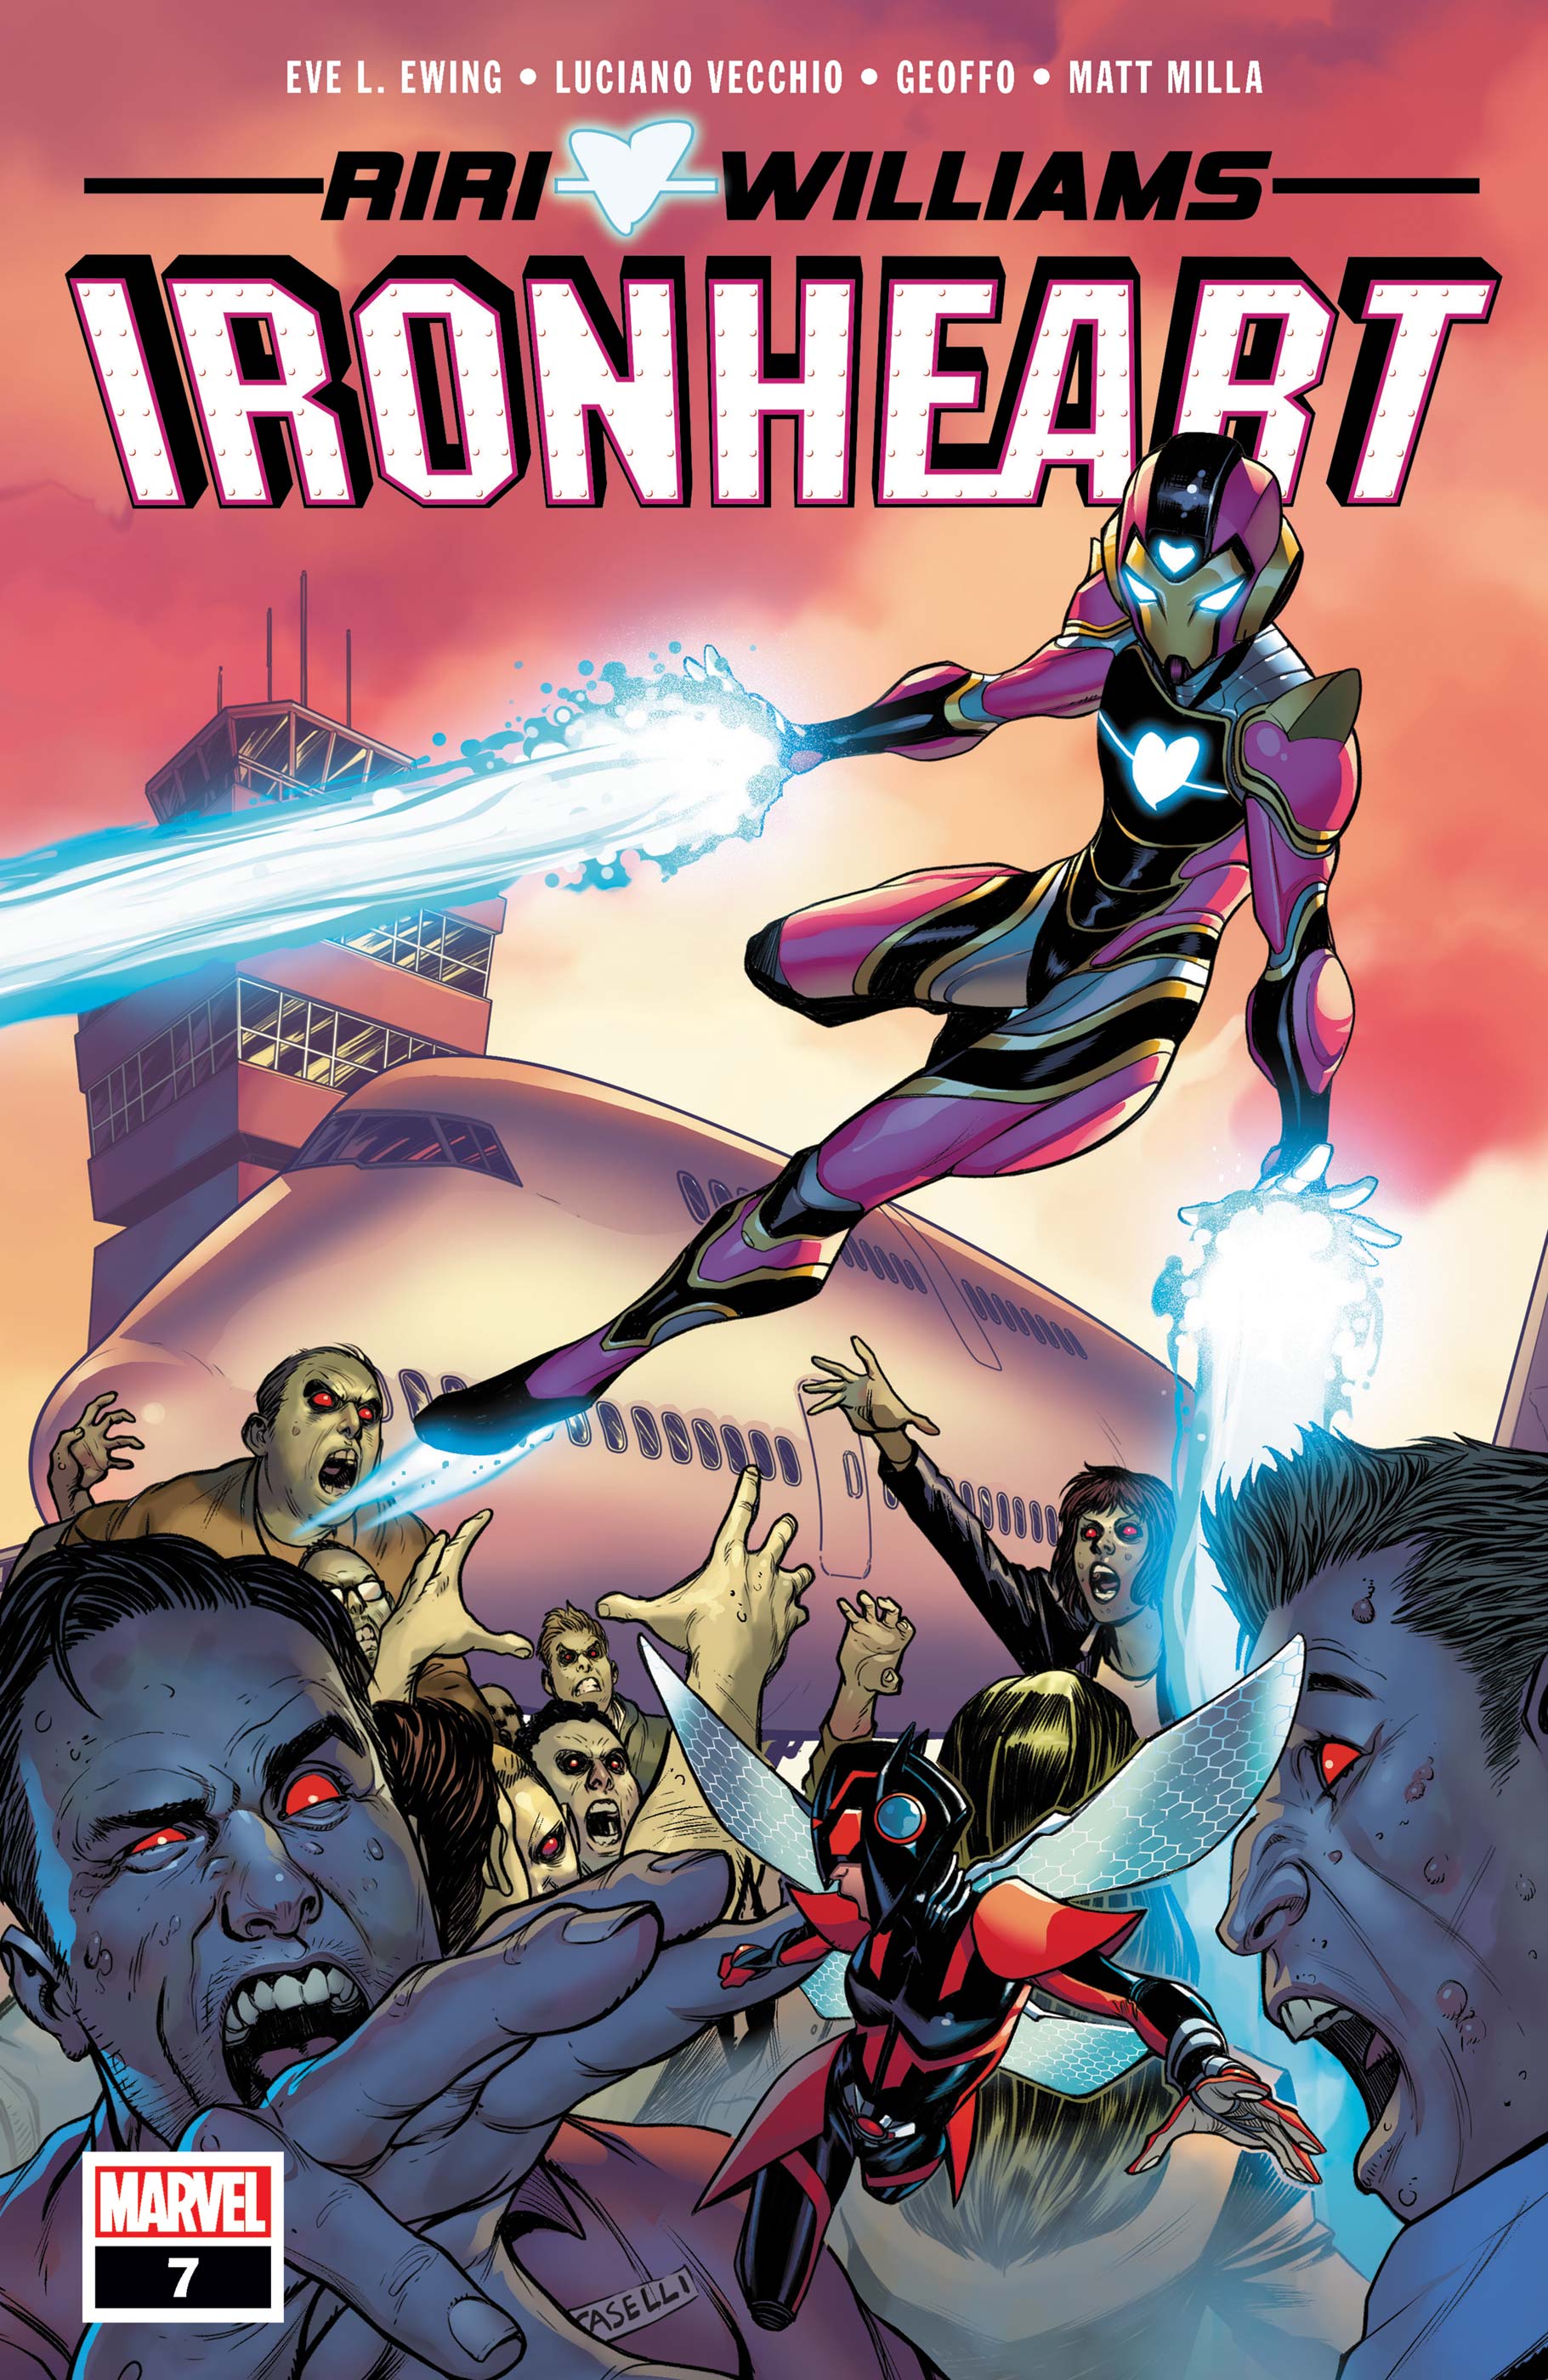 Ironheart #7. Cover by Stefano Caselli.